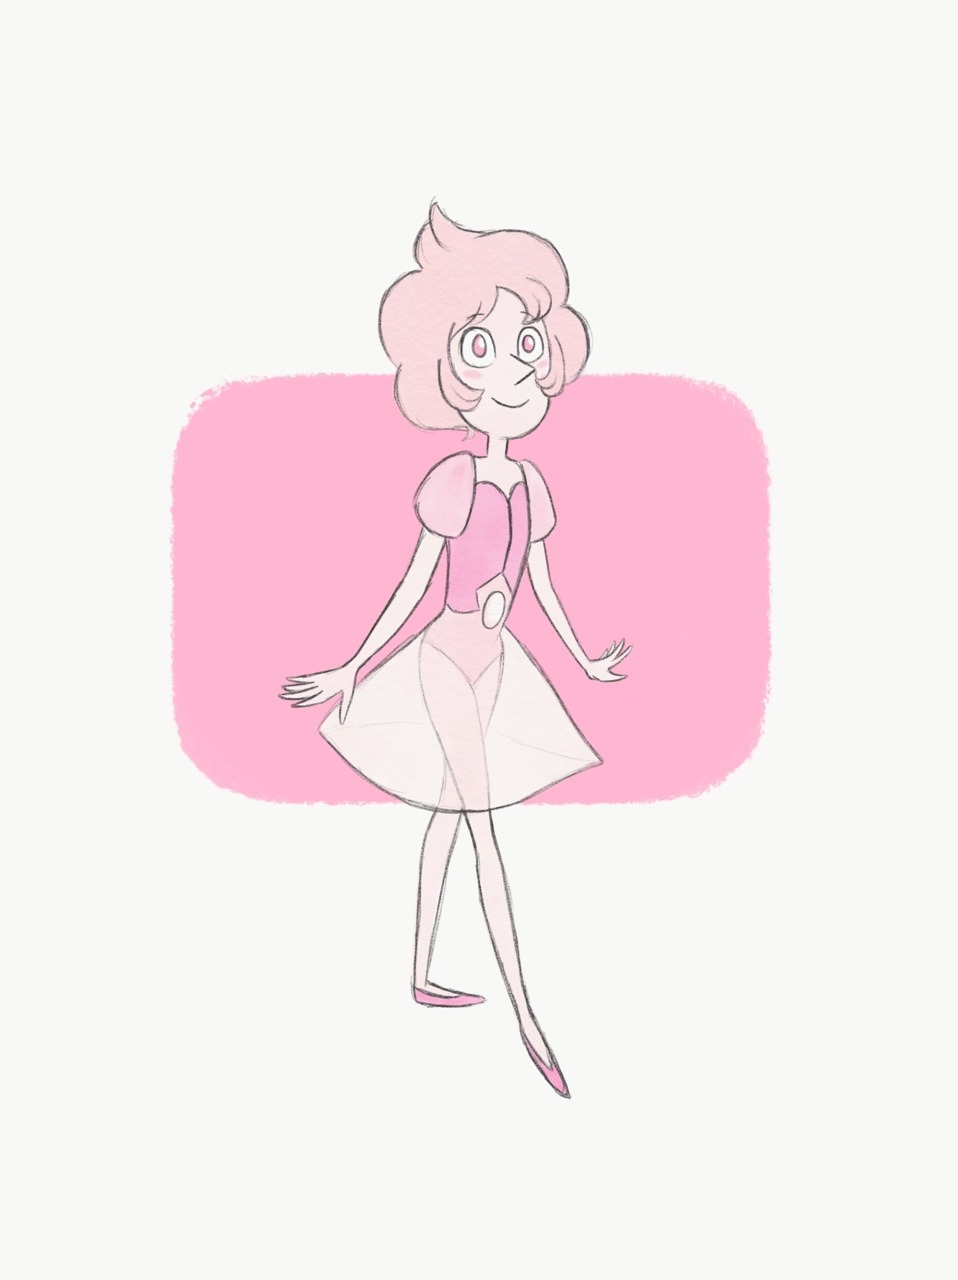 A new bird mom for Steven. Since Pink Diamond’s original pearl mysteriously “disappeared,” a new pearl is made. That Pink Diamond outfit is ugly I need to redesign it